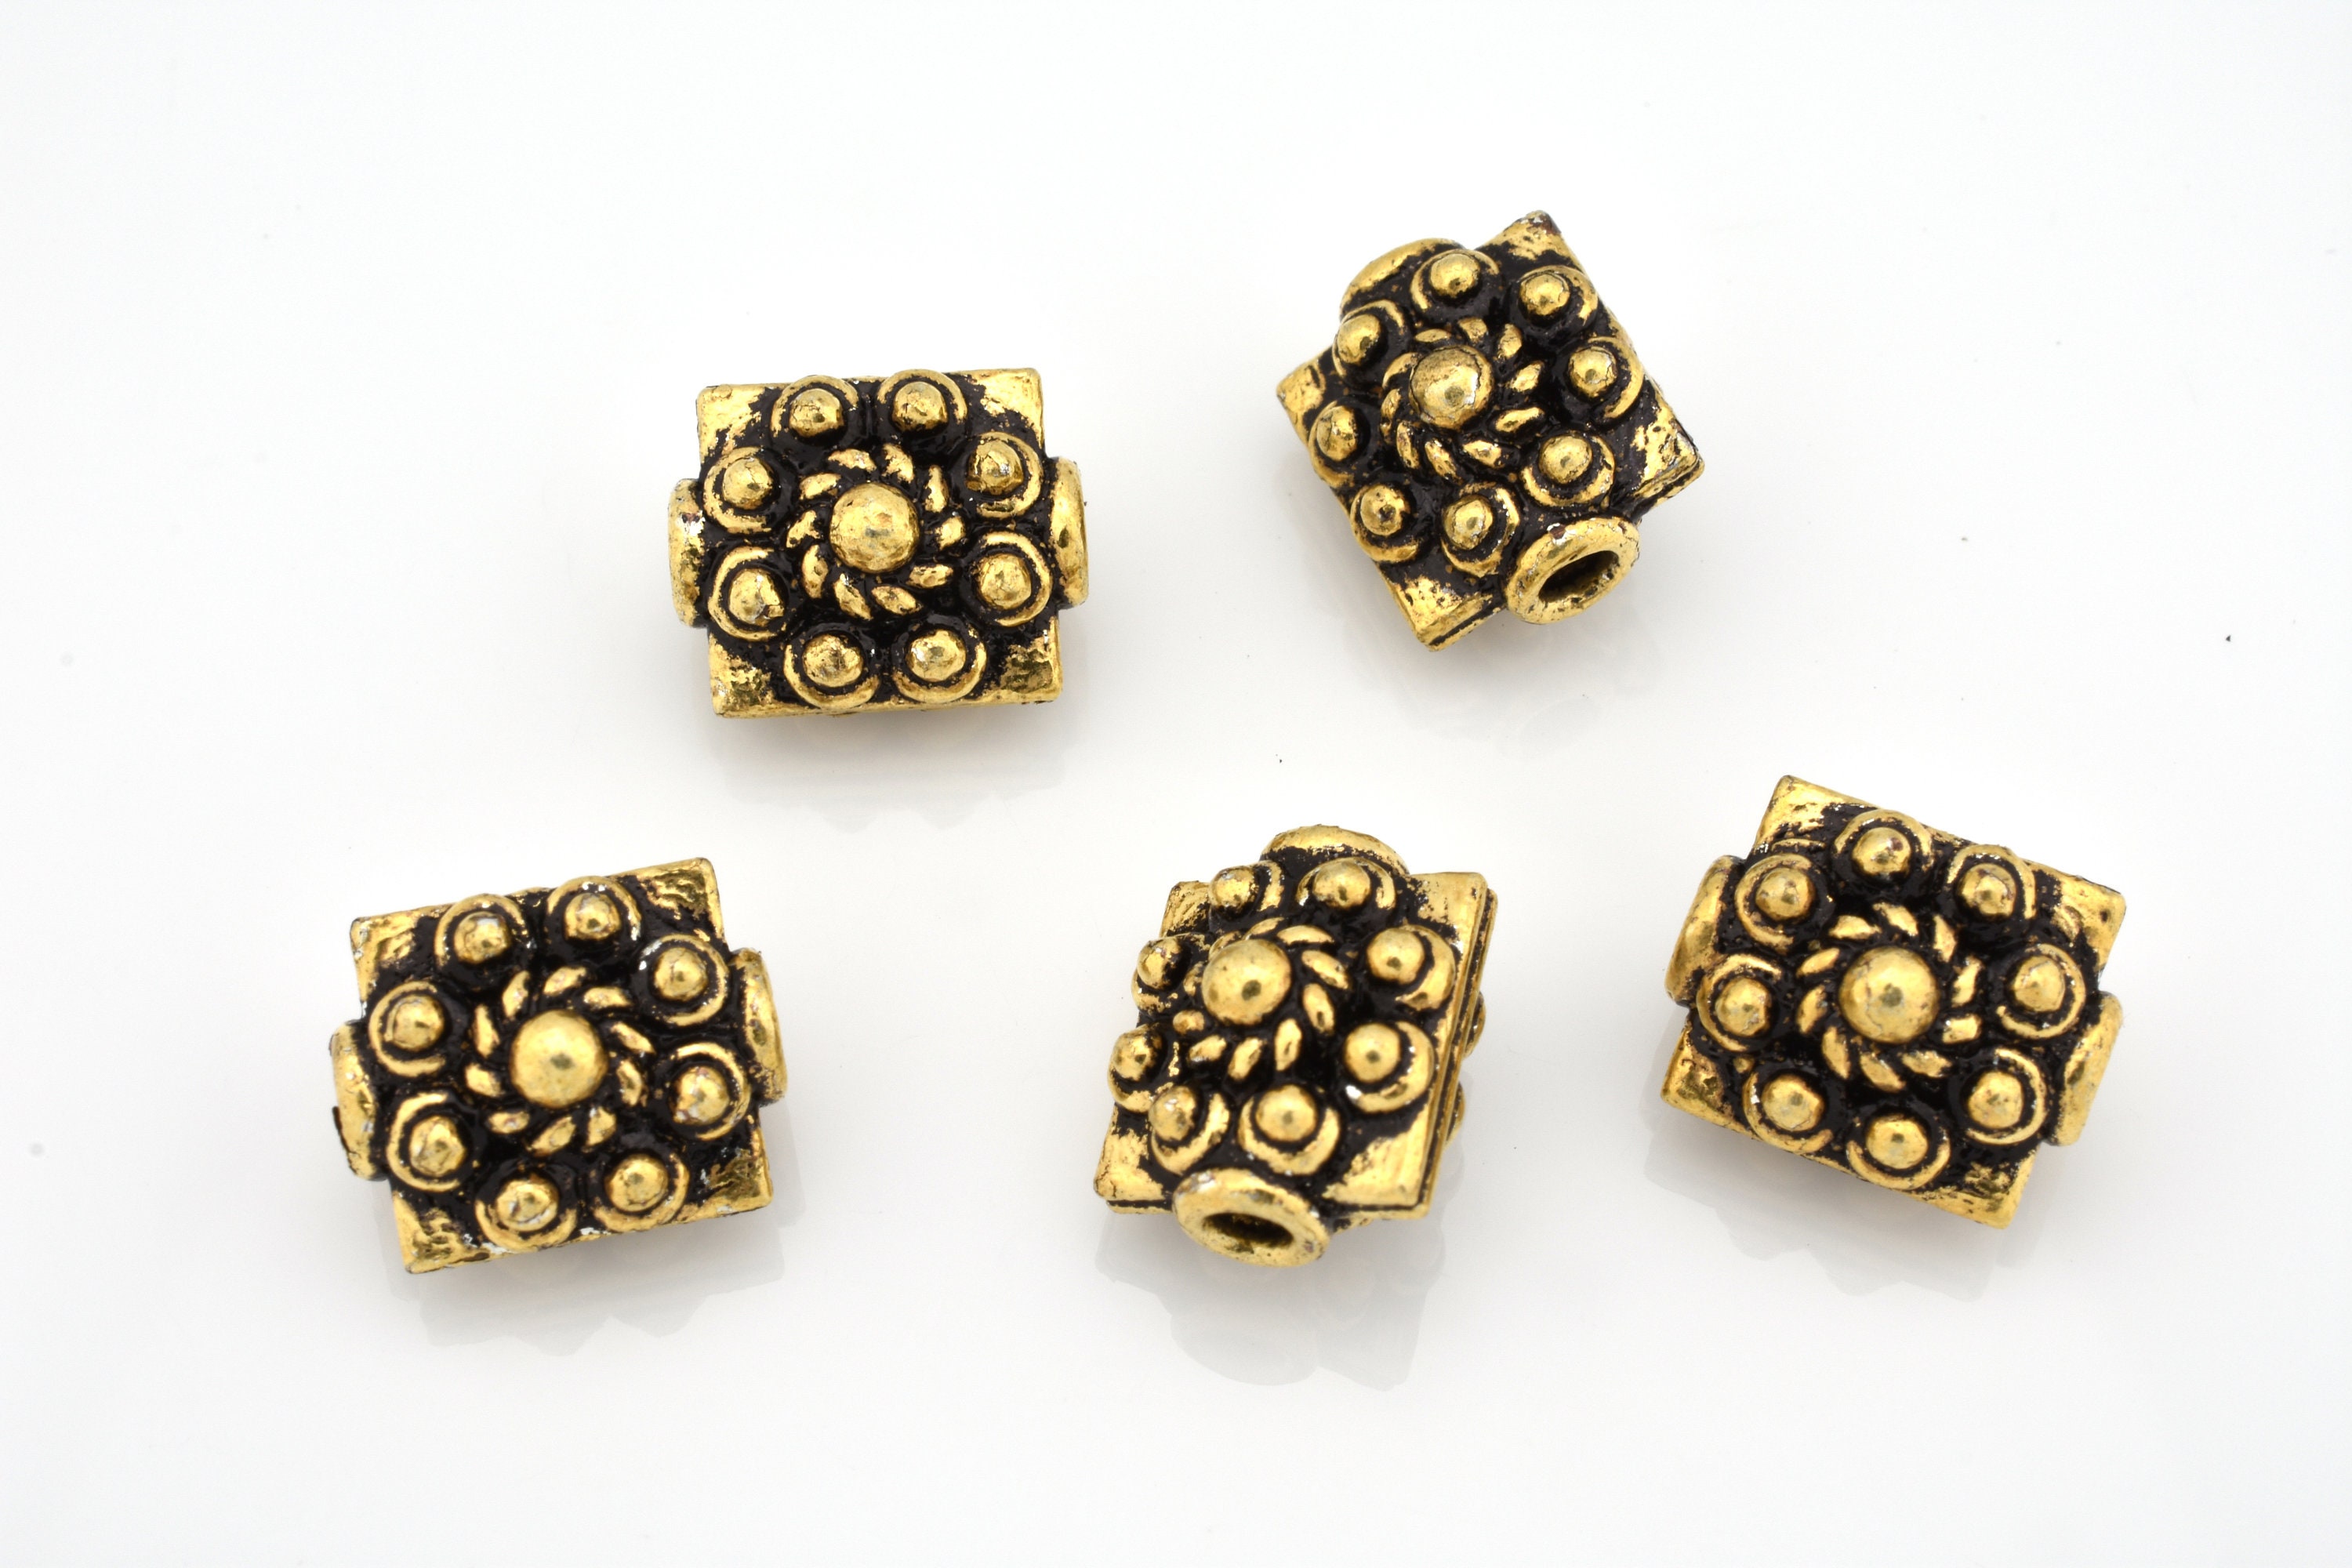 5mm 530pc Gold Bead Caps, Flower Bead Caps, Gold Plated Bali Style Caps for Jewelry  Making, Metal Bead Caps Supplies 